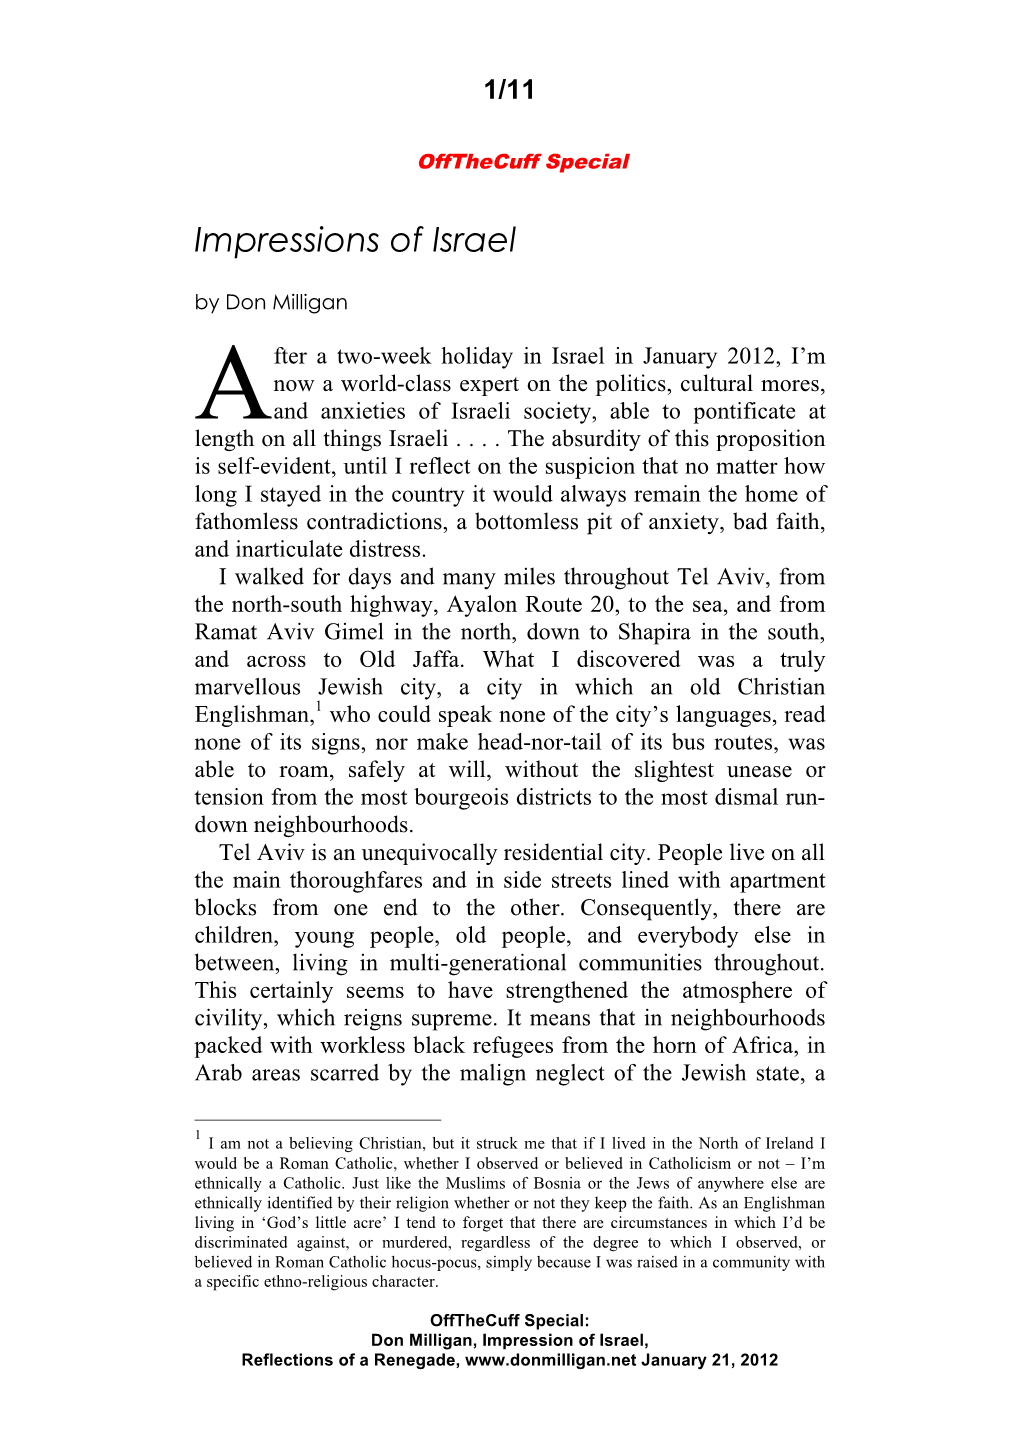 Impressions of Israel by Don Milligan